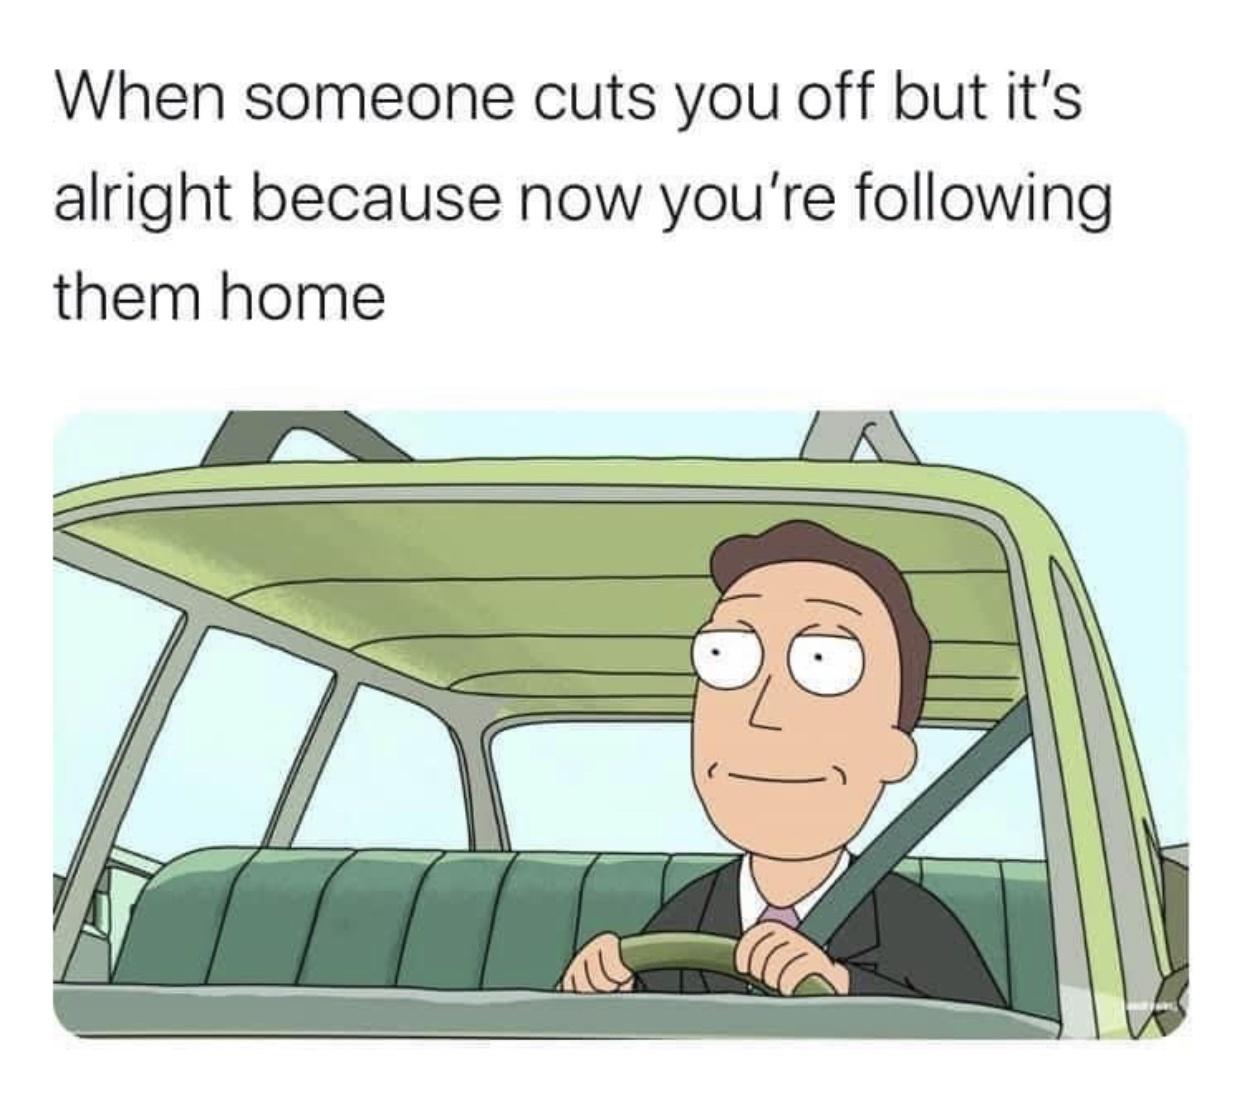 funny memes and random pics - listening to songs about selling drugs meme - When someone cuts you off but it's alright because now you're ing them home